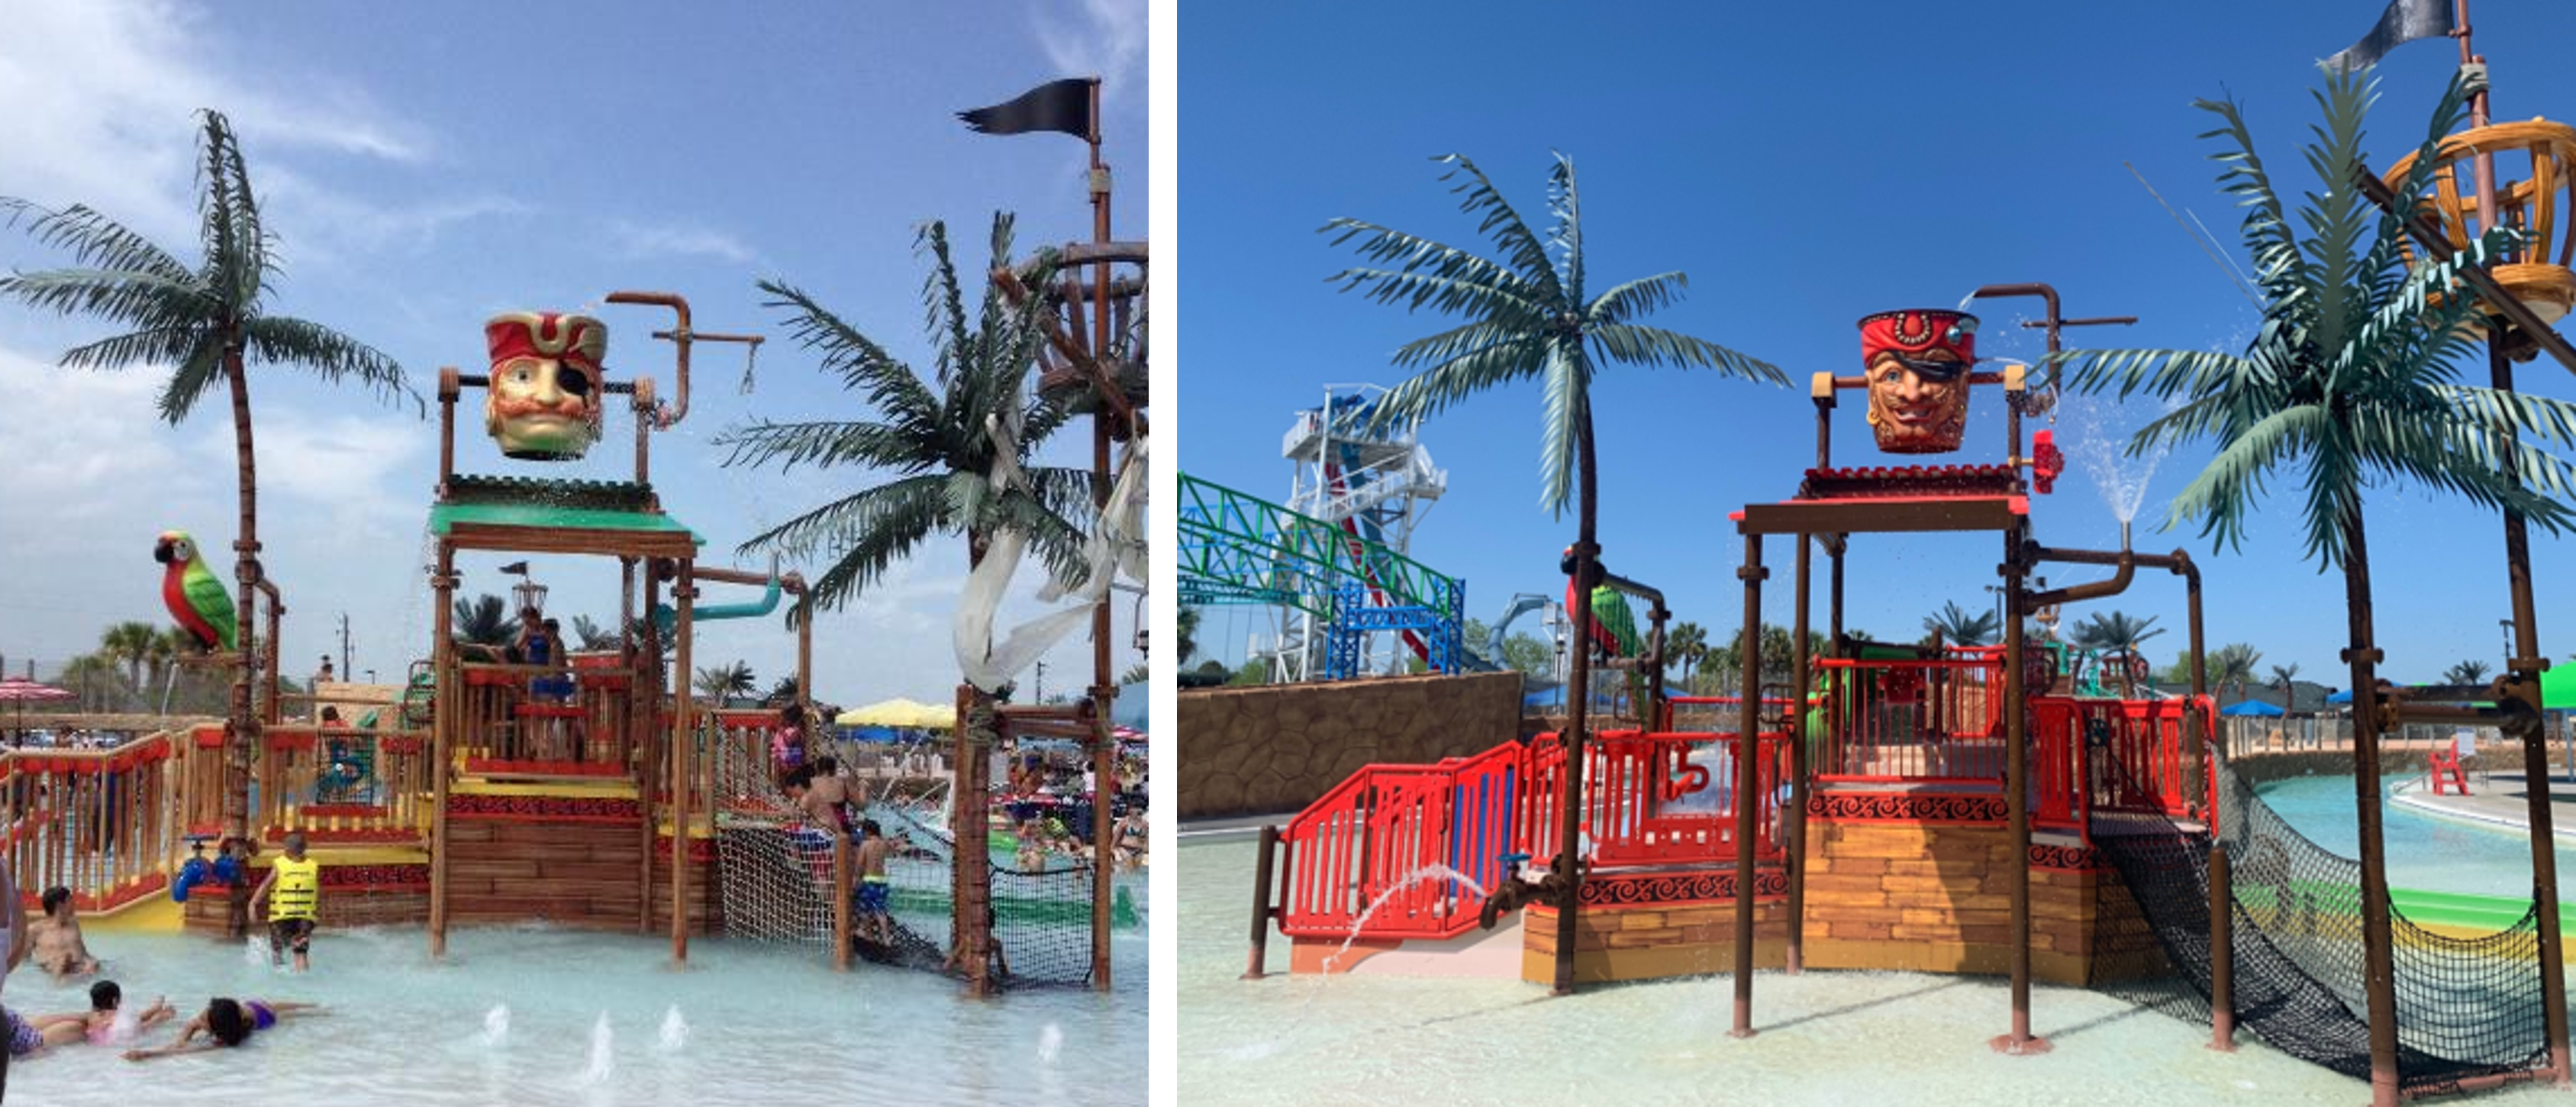 Aquatic play structure before and after refurbishment